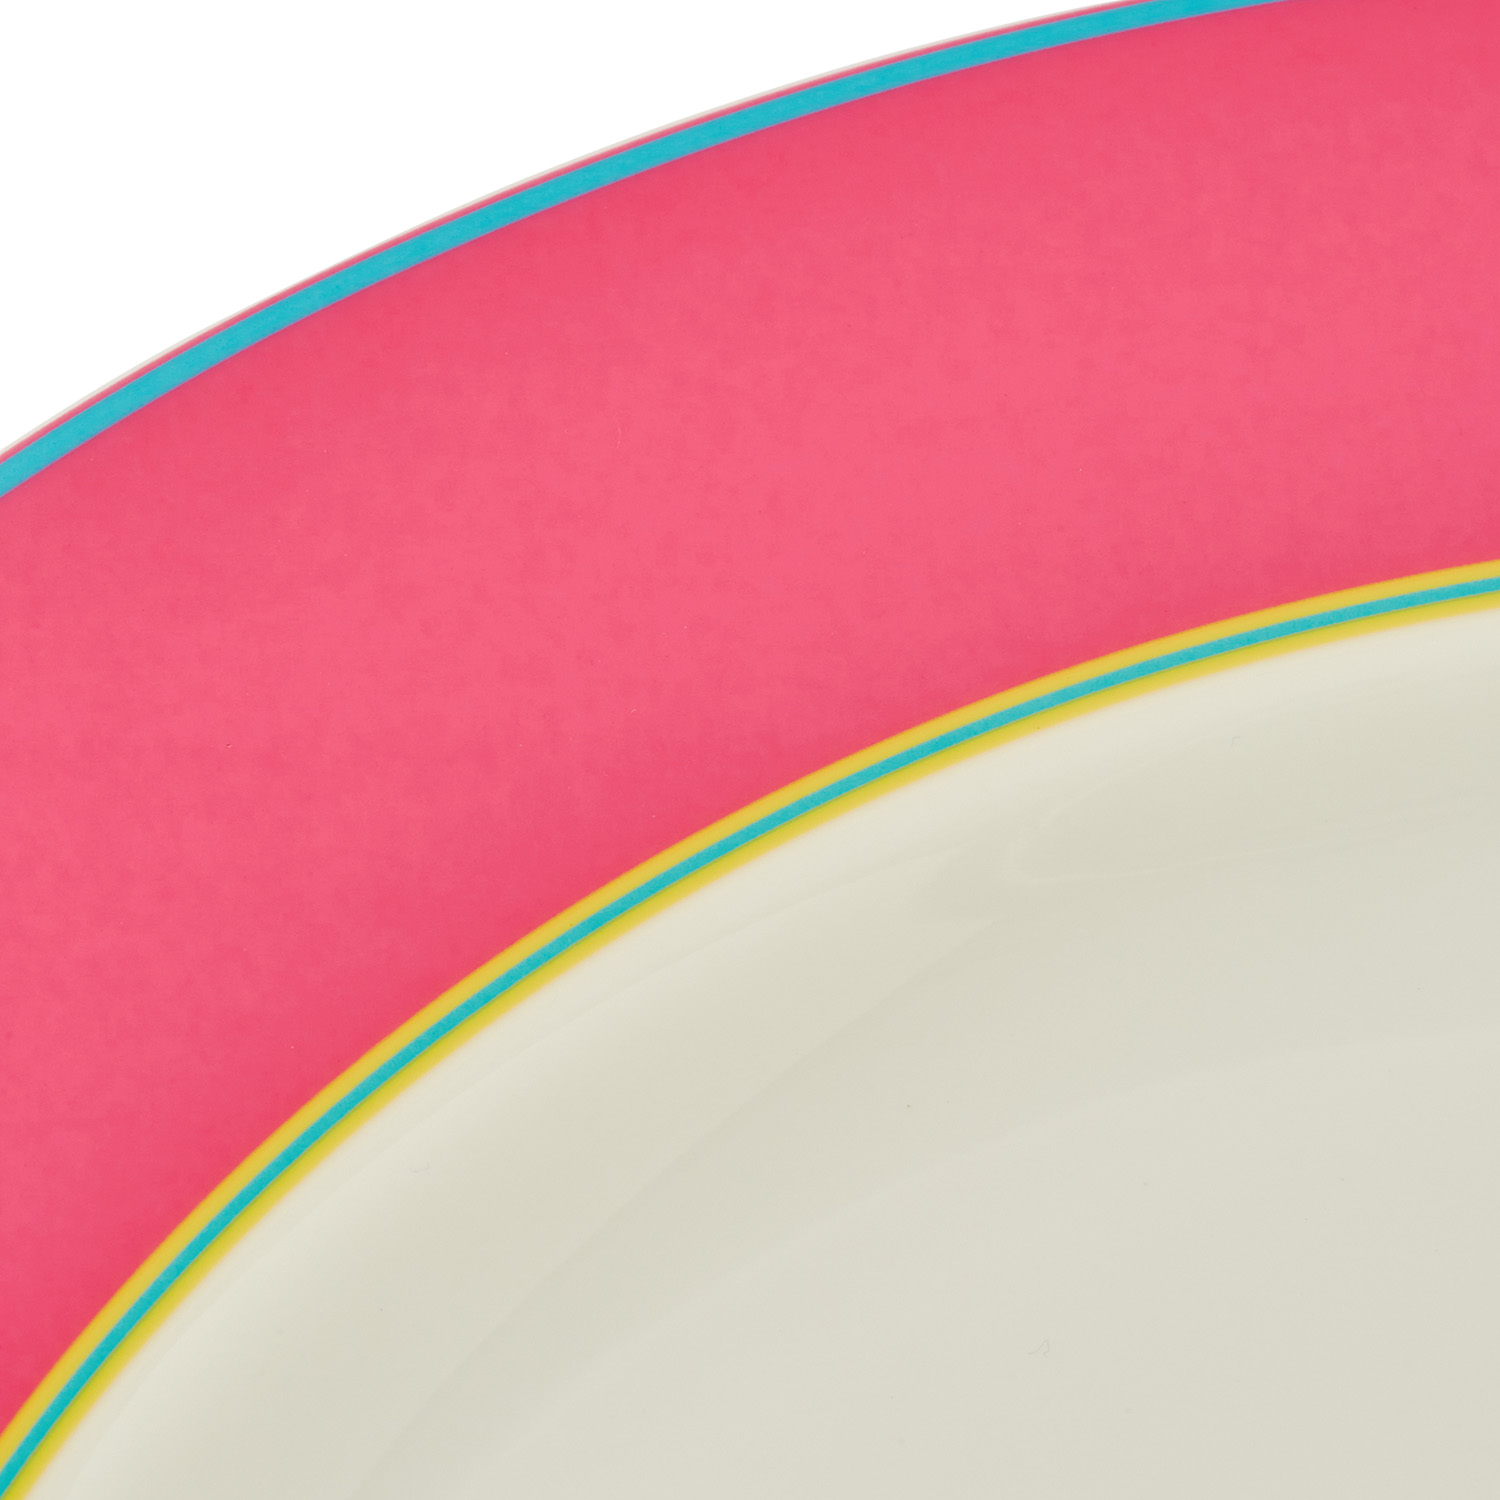 Calypso Pink Platter image number null